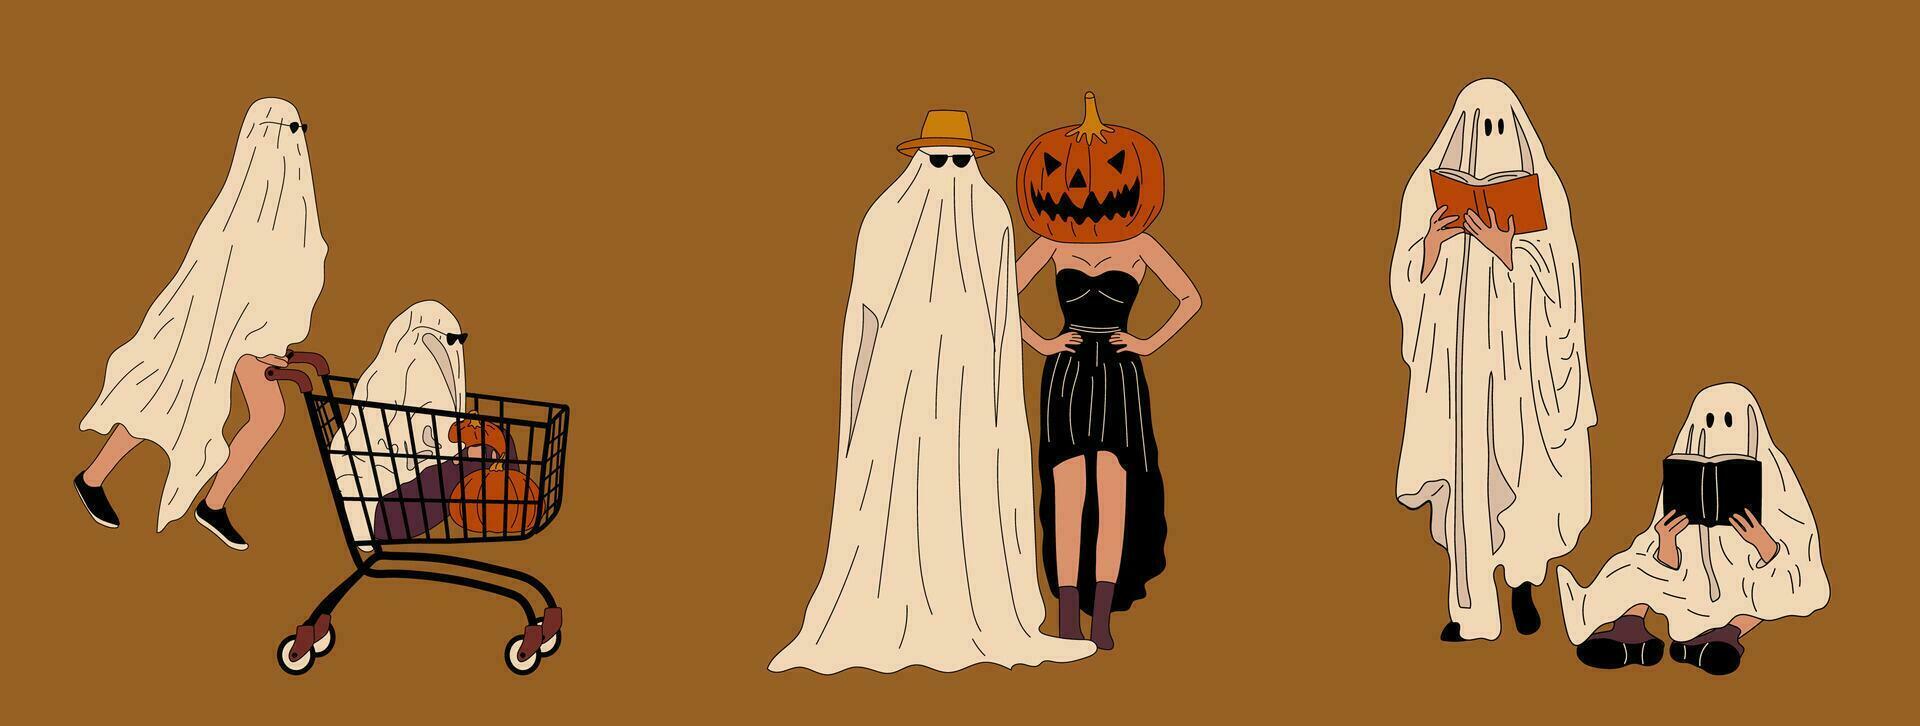 Set of Couples in Halloween costume. Ghost. Flat design style vector illustration